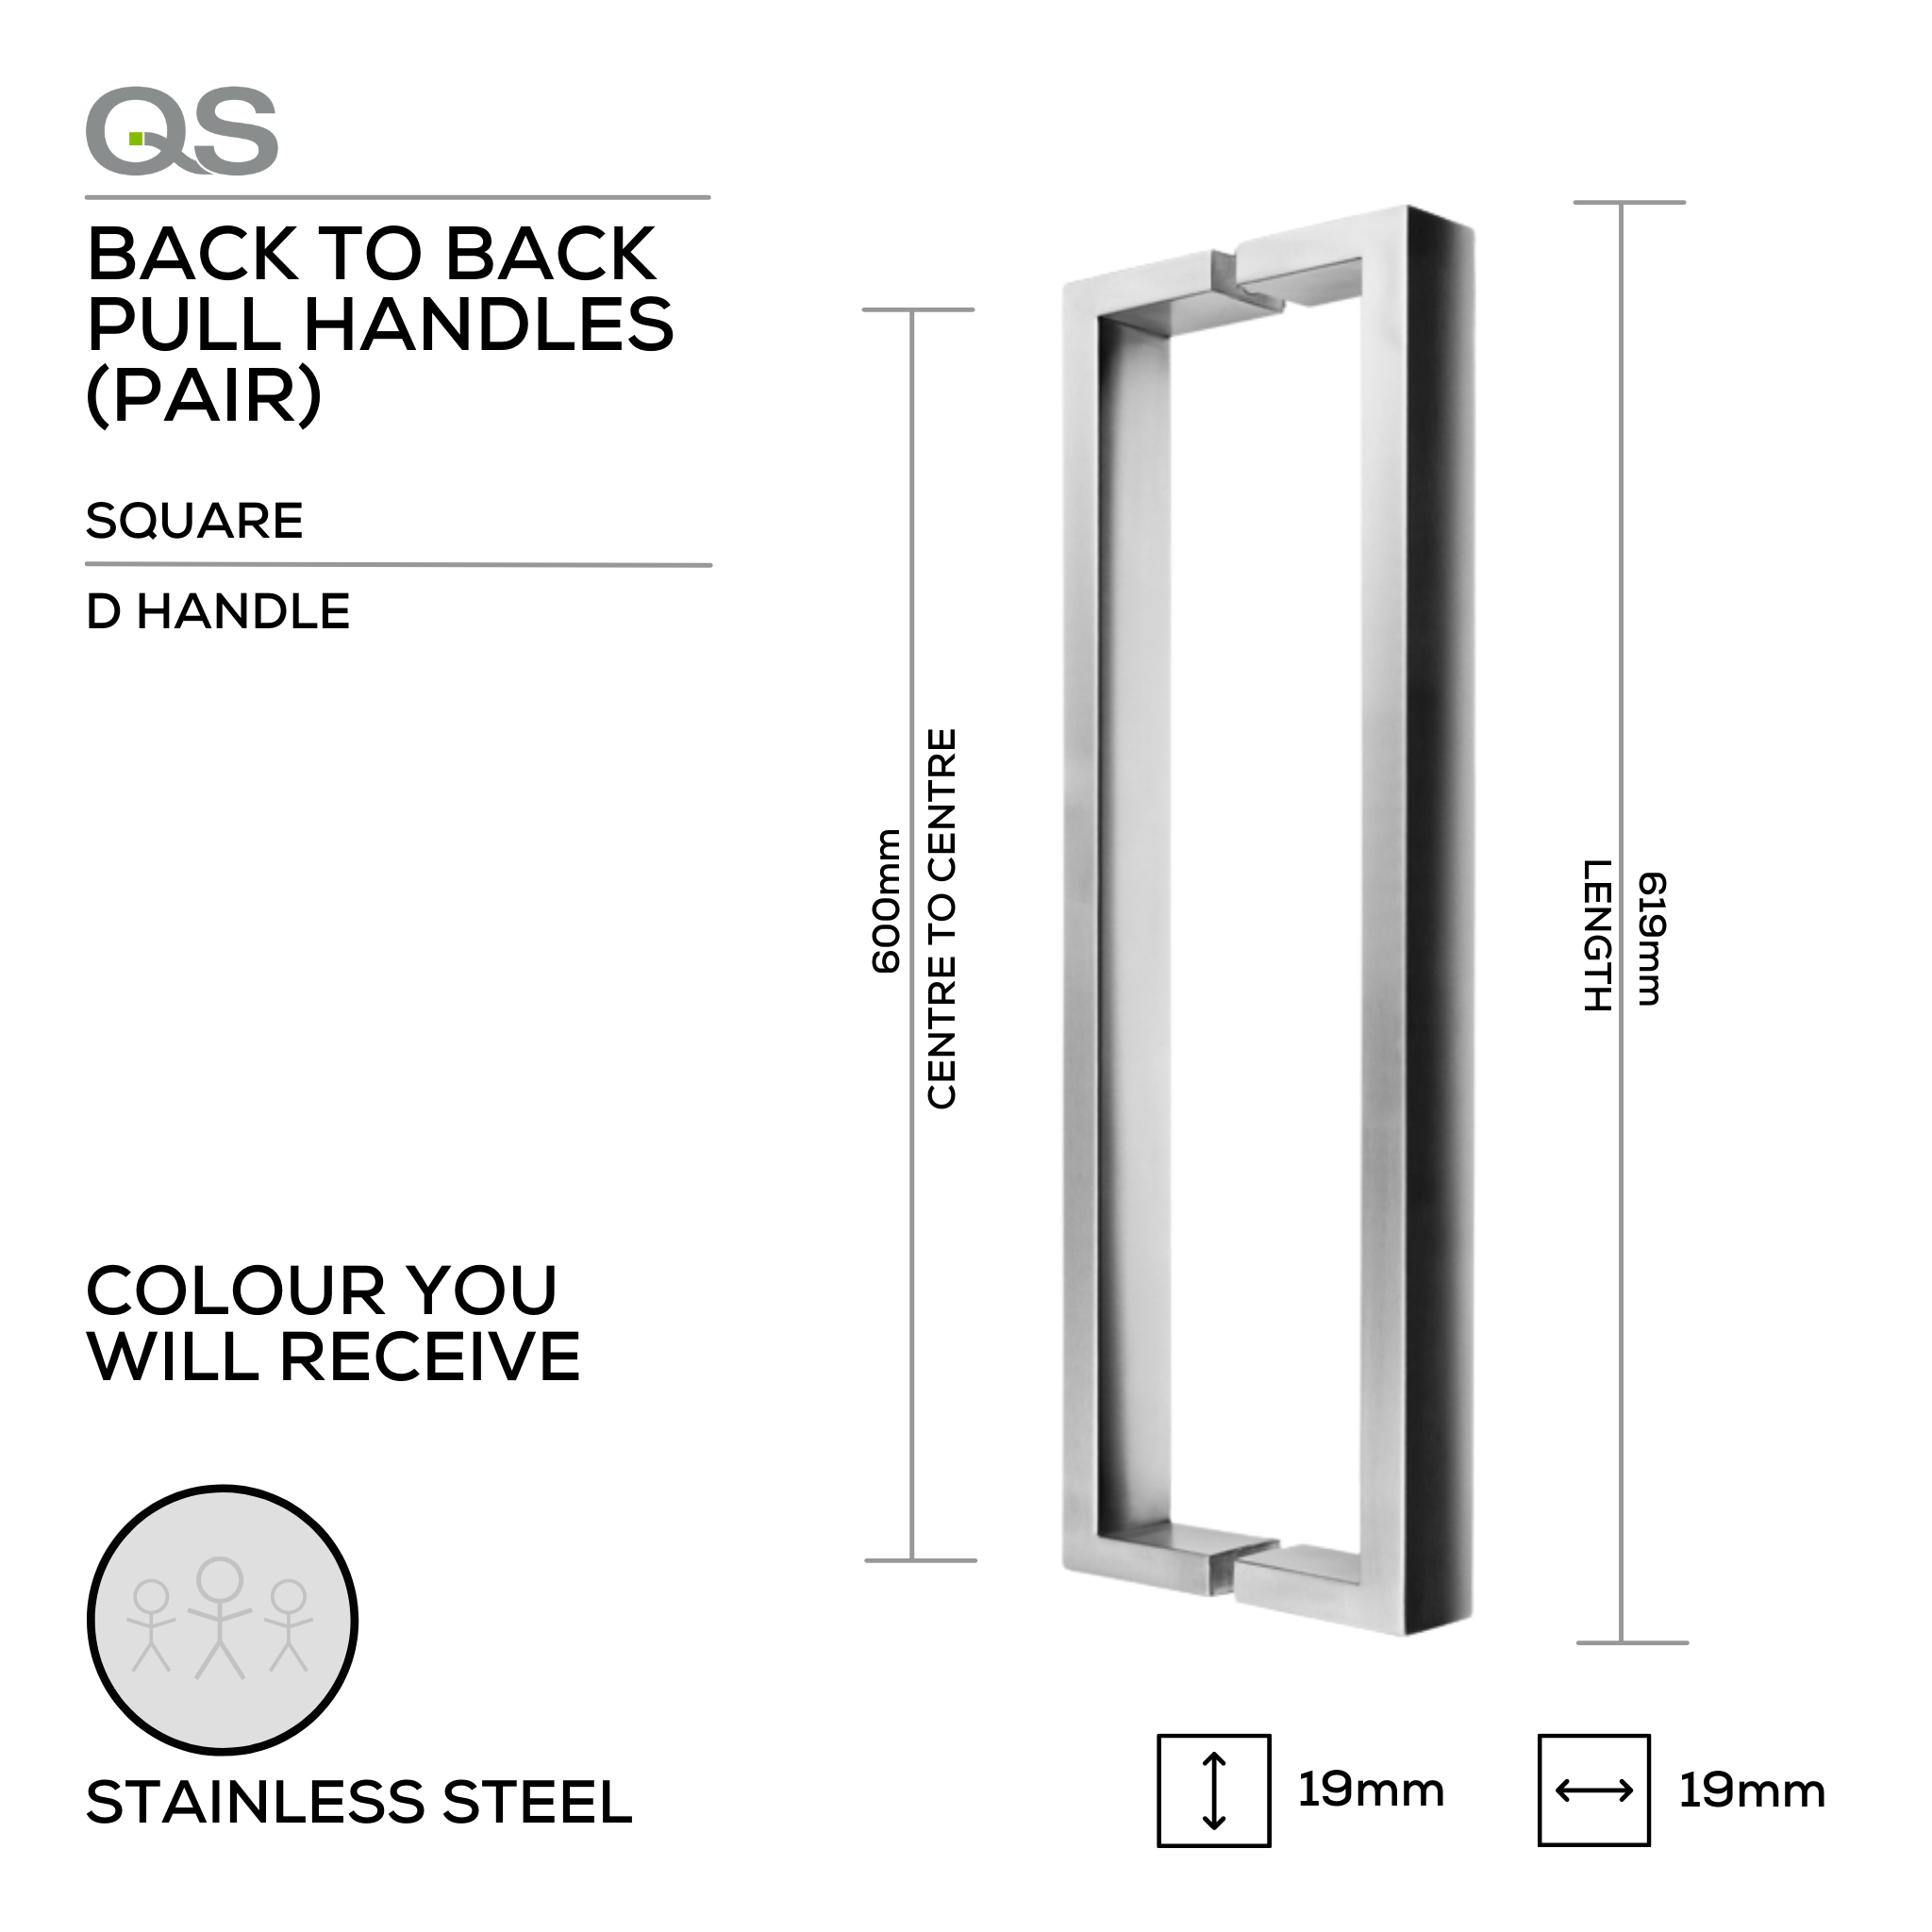 QS2624 SQ SECT, Pull Handle, Square, D Handle, BTB, 19mm (d) x 619mm (l) x 600mm (ctc), Stainless Steel, QS